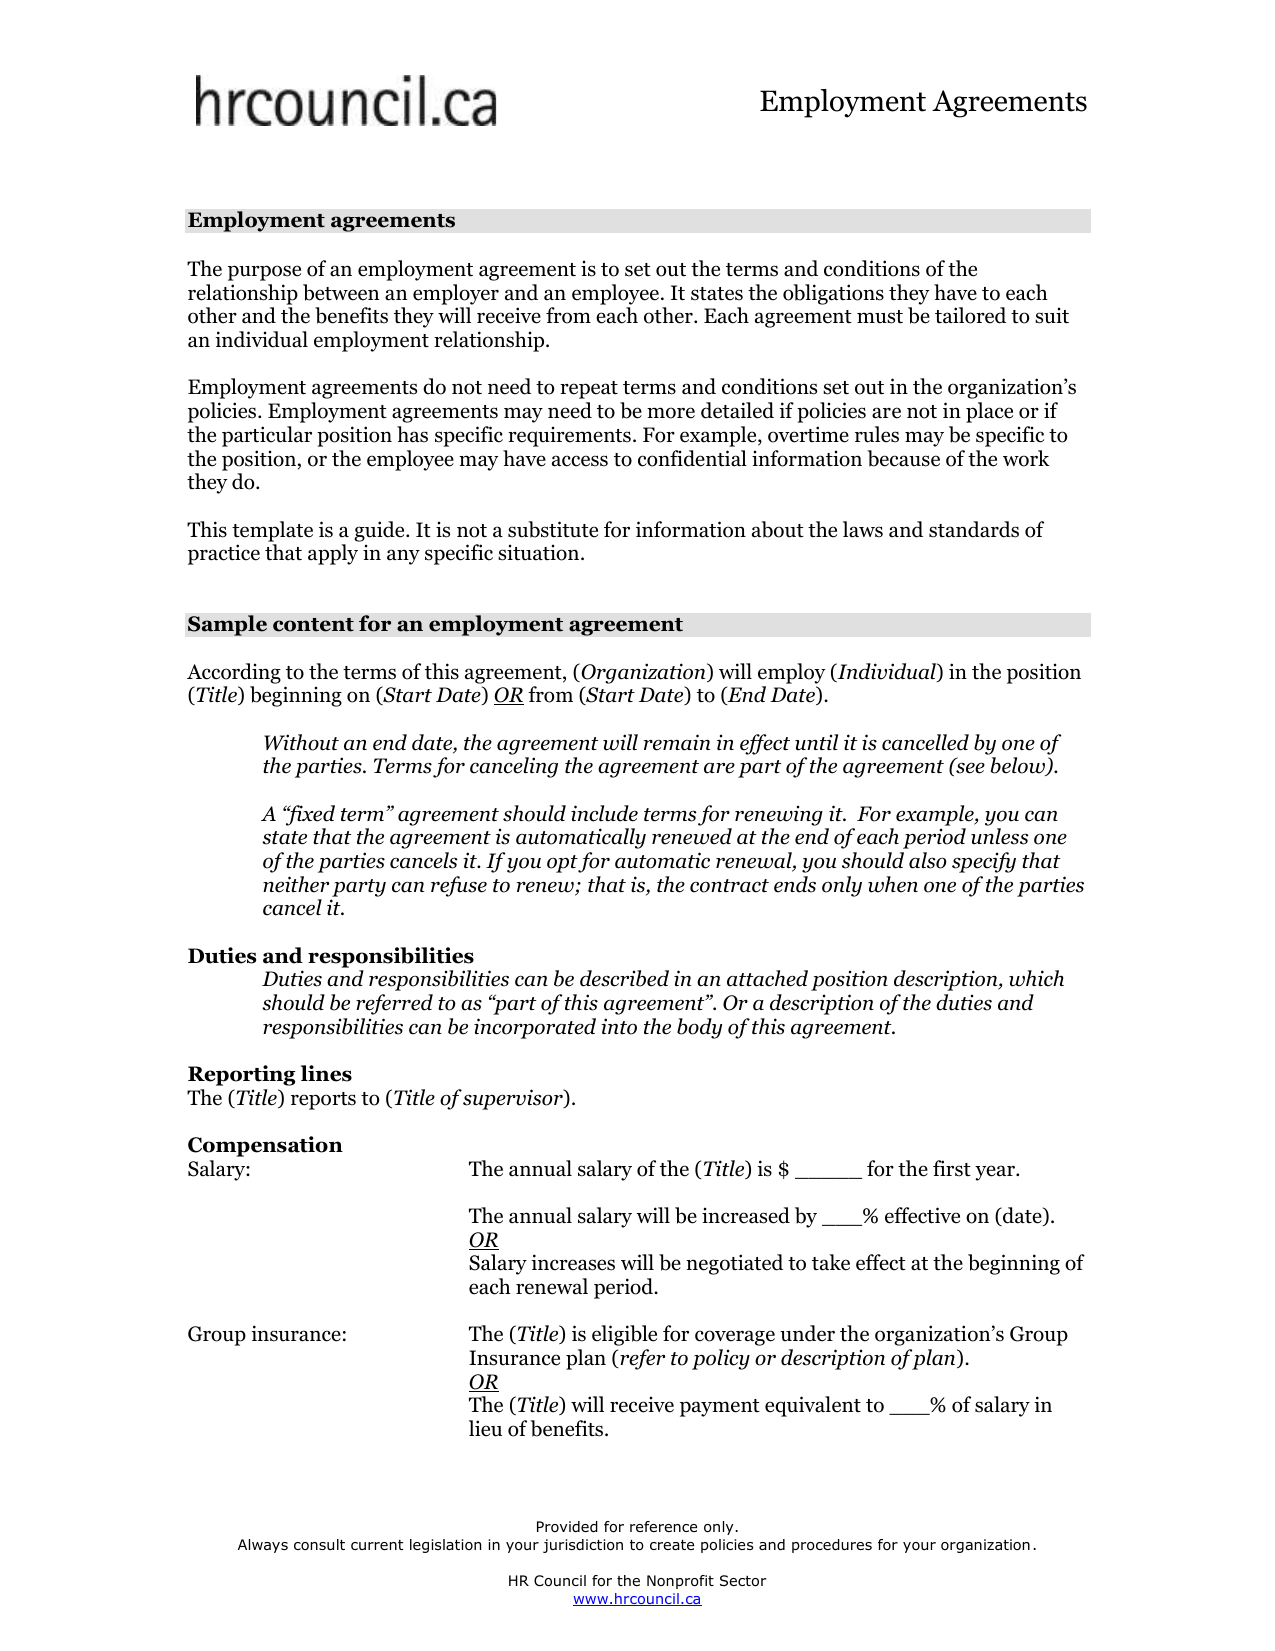 Employment Agreement Template - HR Council for the Nonprofit Inside overtime agreement template